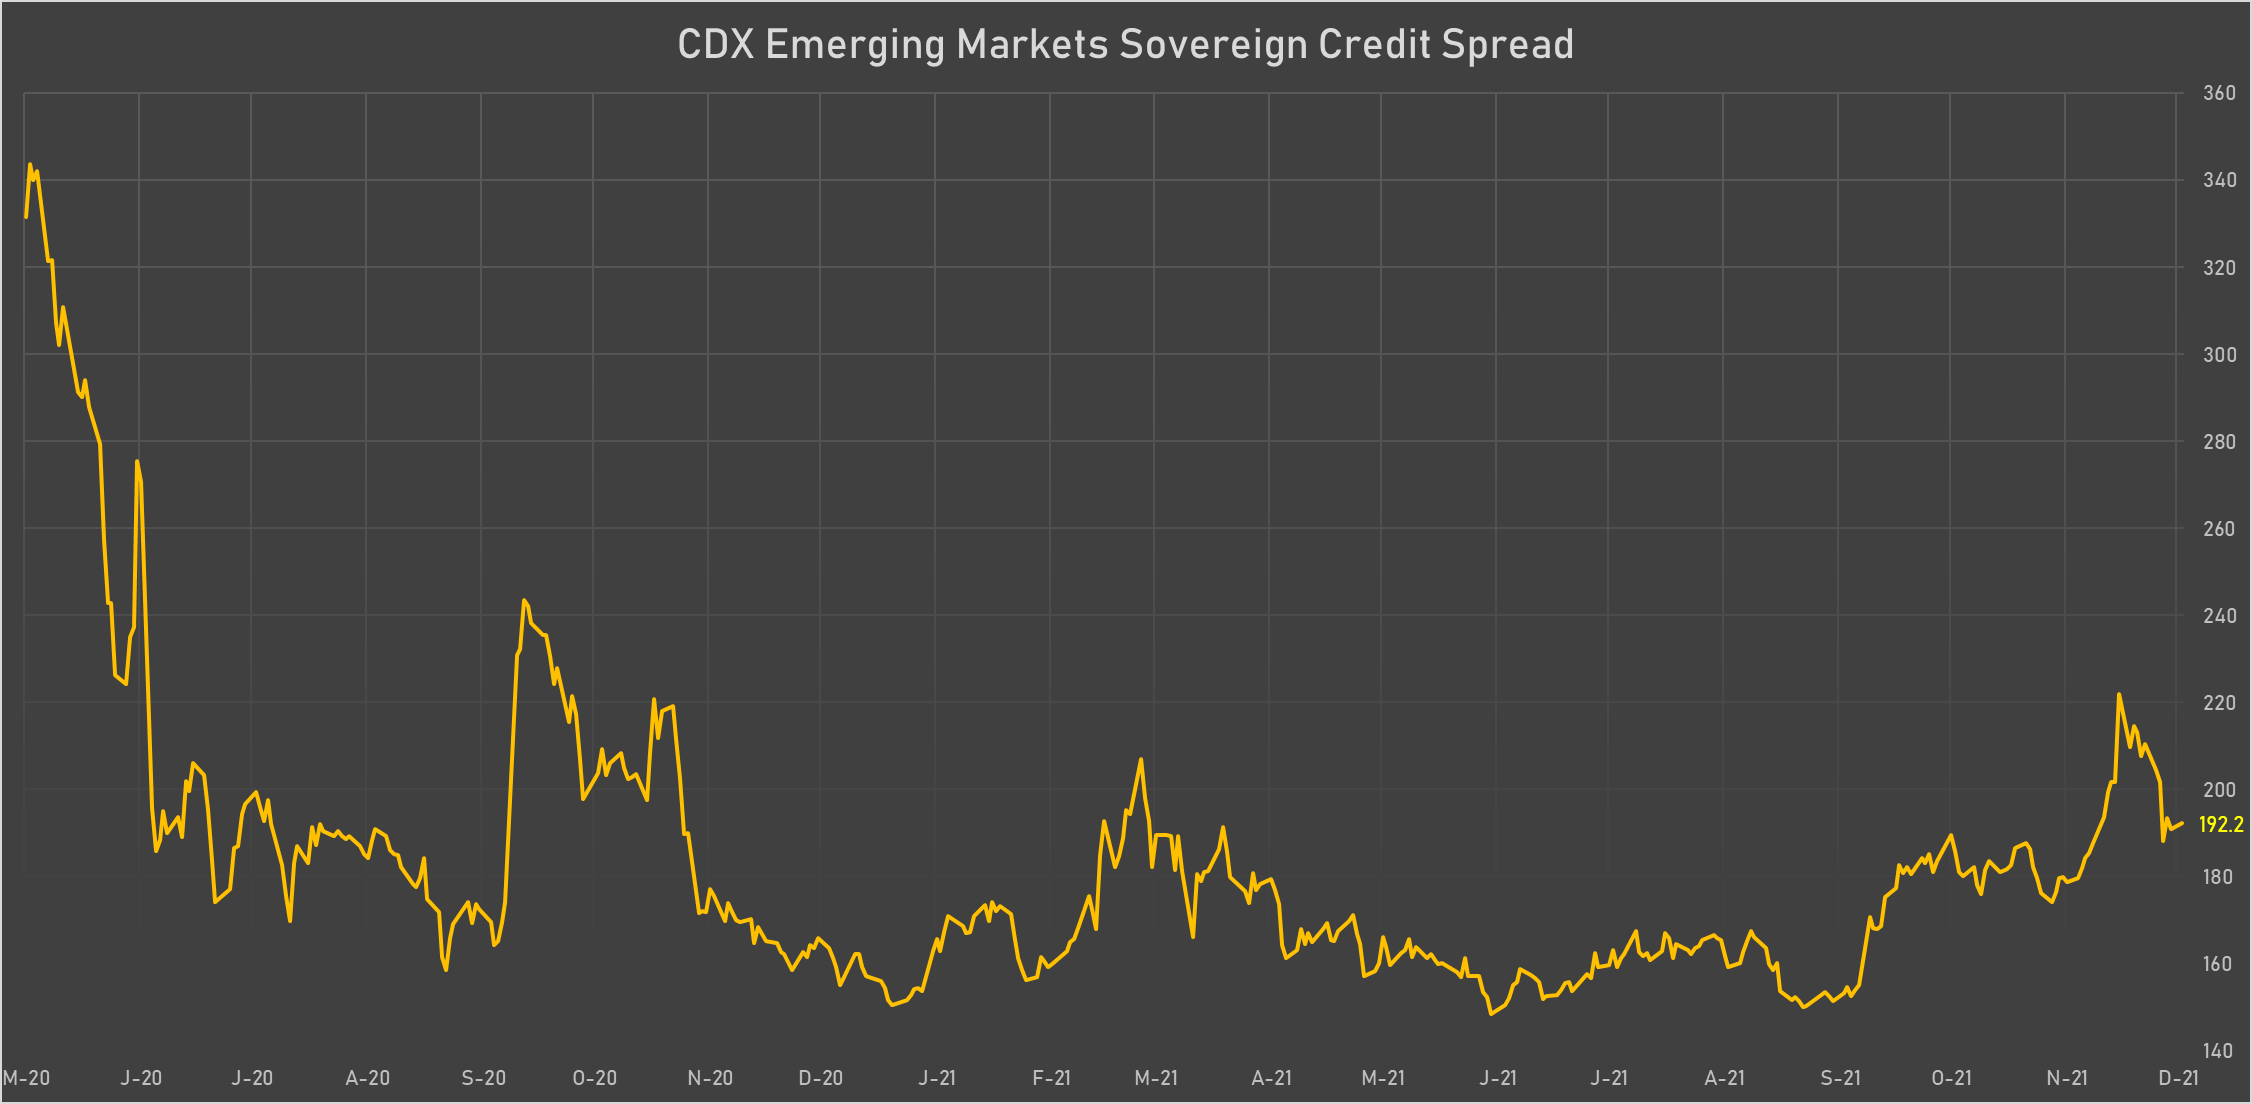 CDX Emerging Markets Sovereign Credit Spread | Sources: phipost.com, Refinitiv data